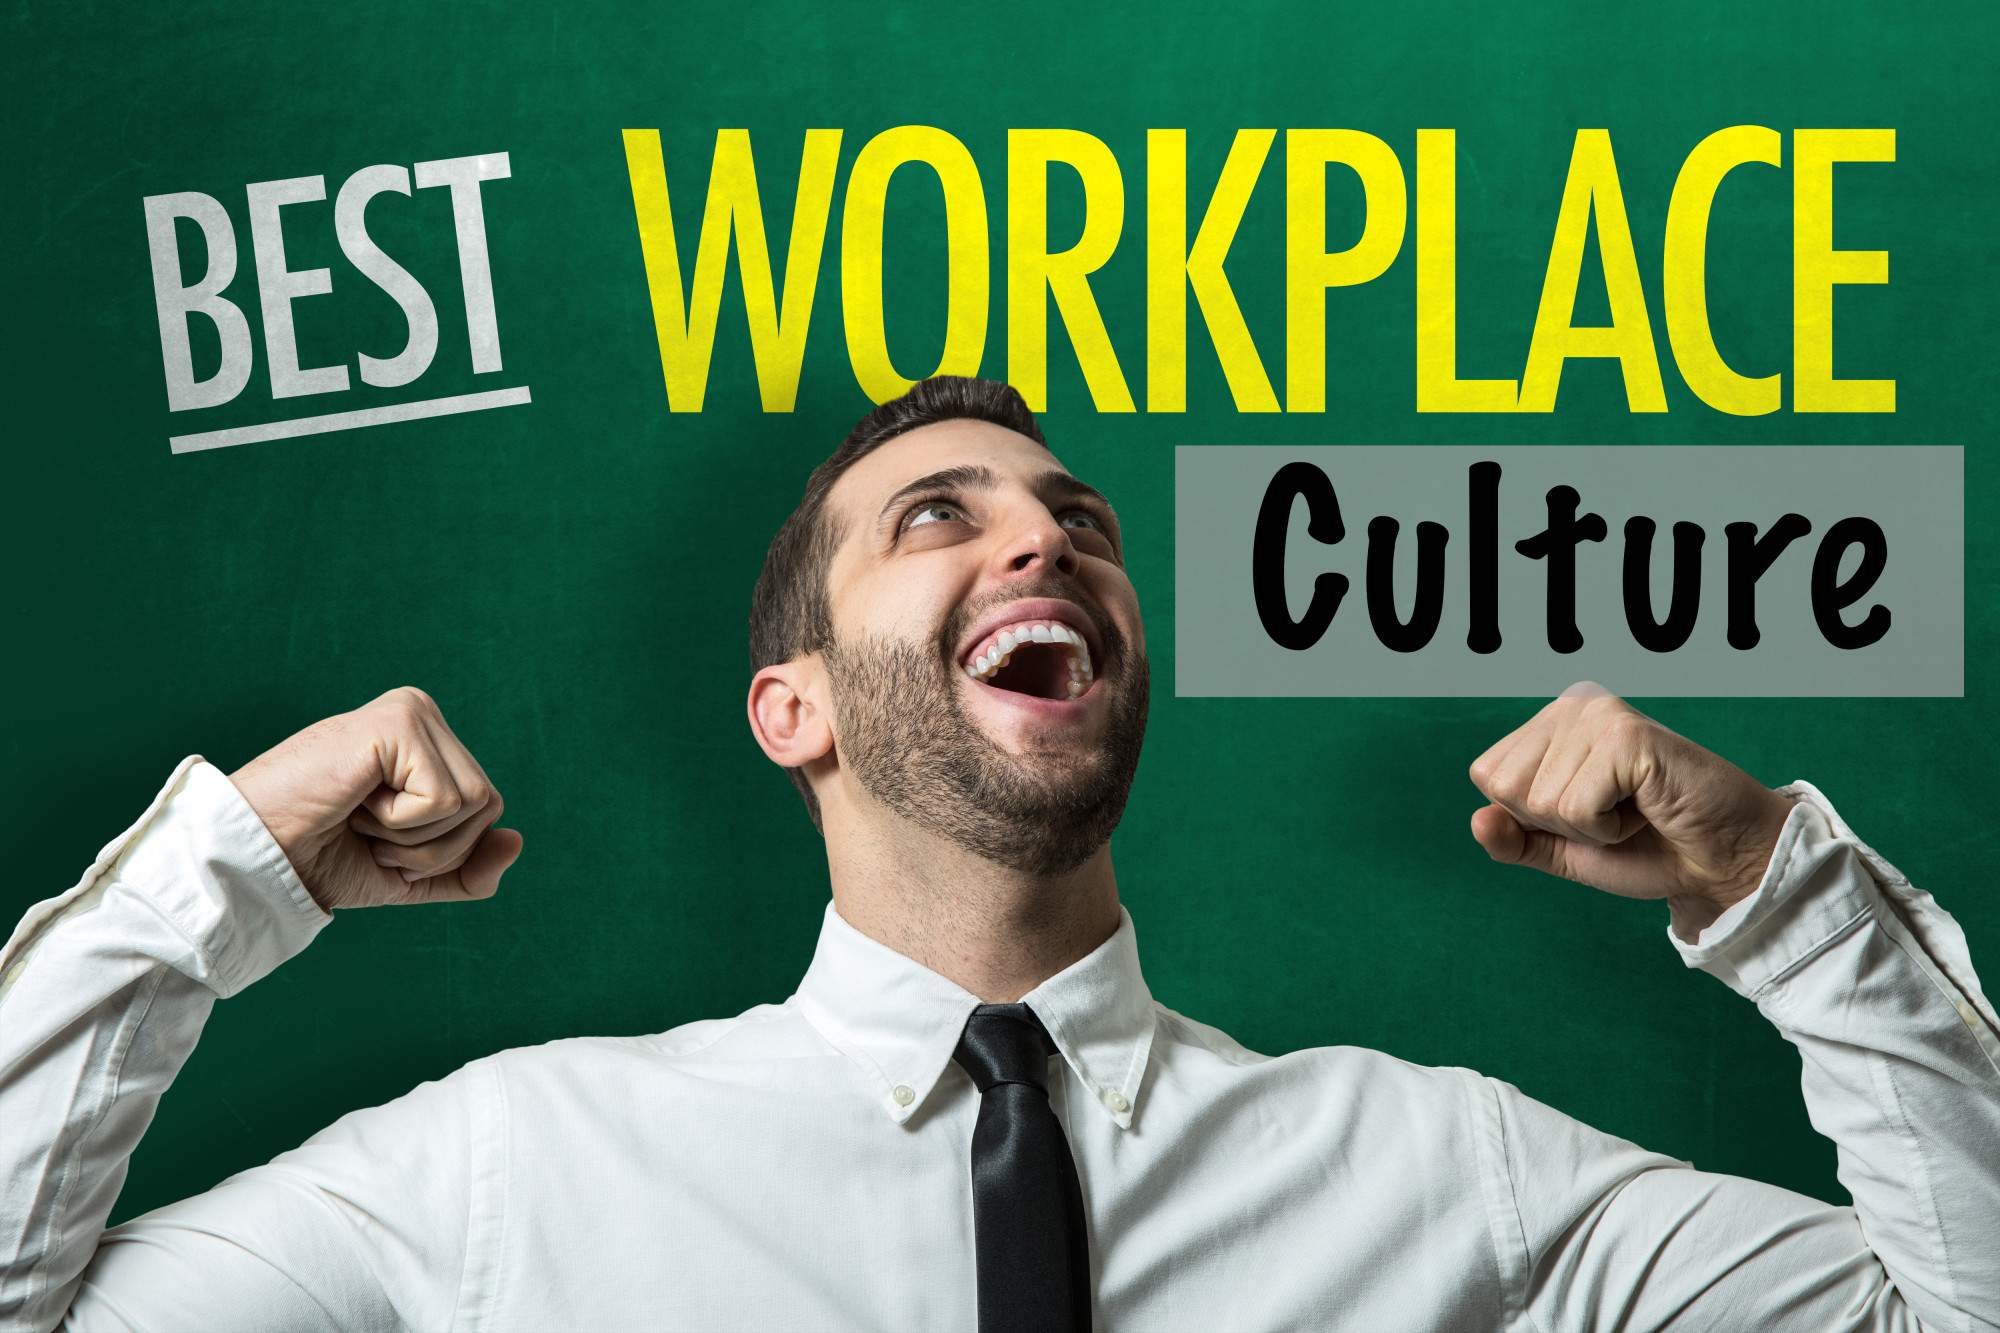 The Brief Guide That Makes Improving Your Workplace Culture Simple